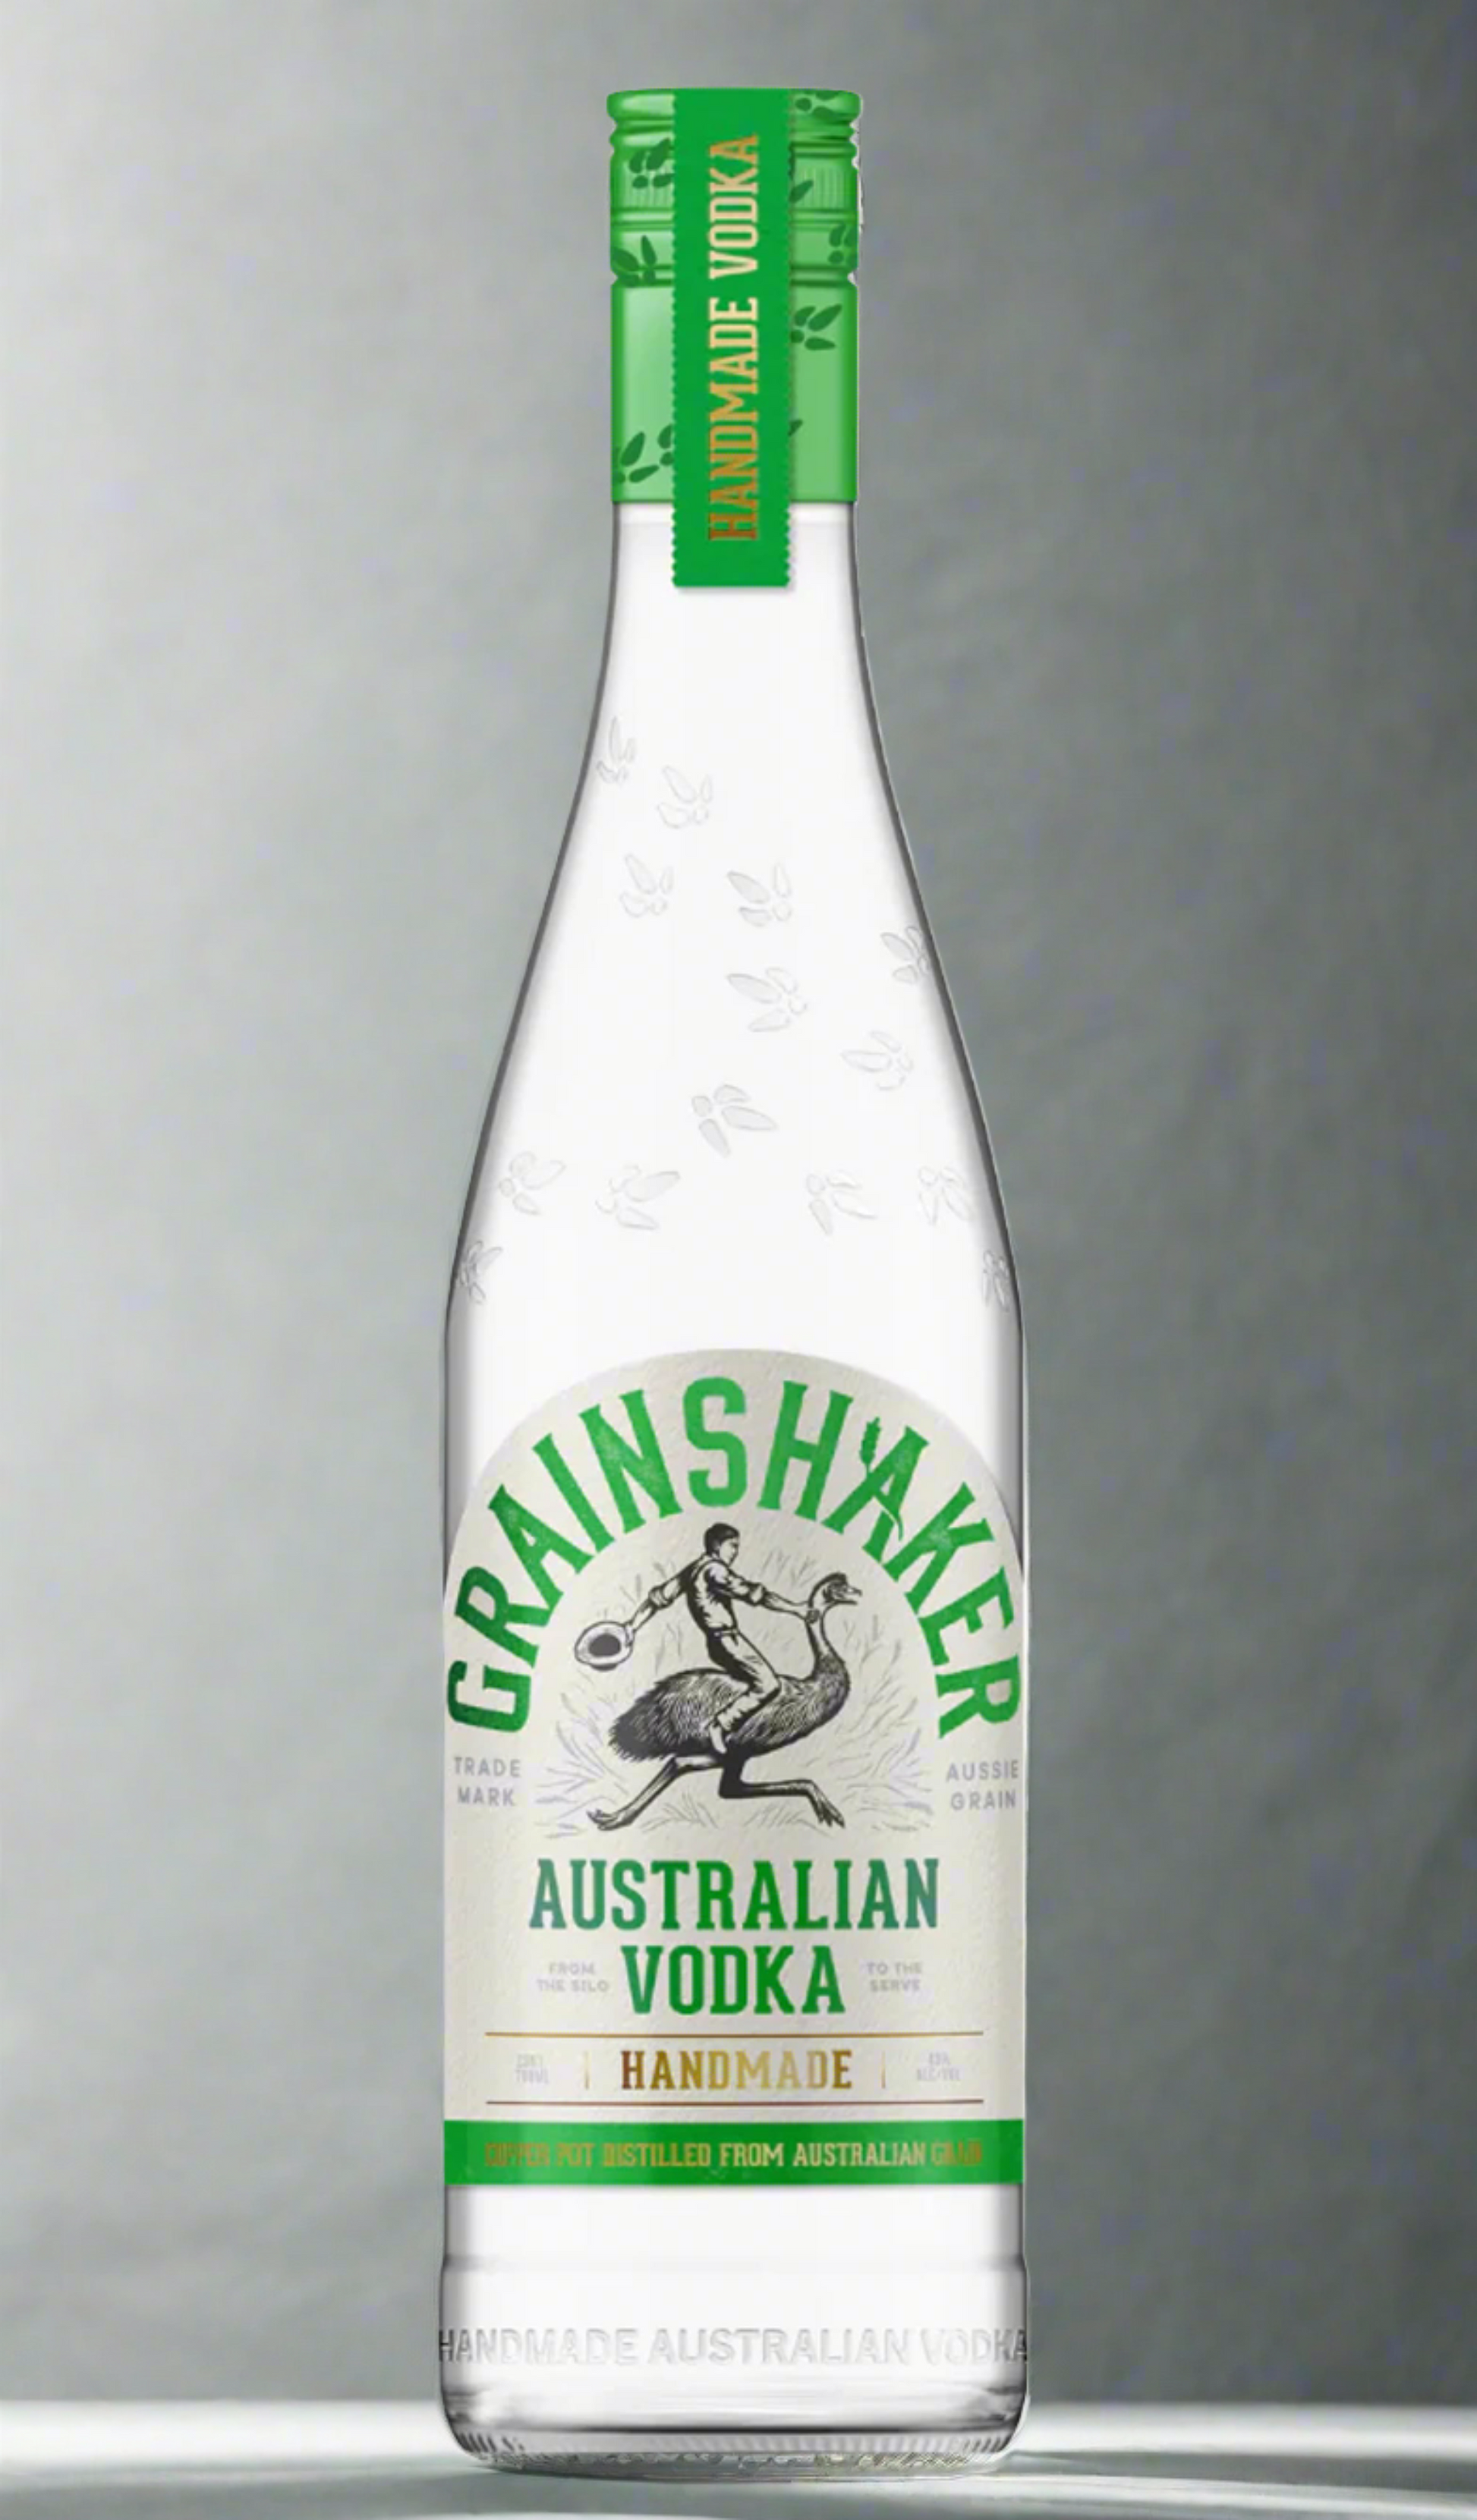 Find out more, explore the range and purchase Grainshaker Australian Corn Vodka 700ml available online at Wine Sellers Direct - Australia's independent liquor specialists.